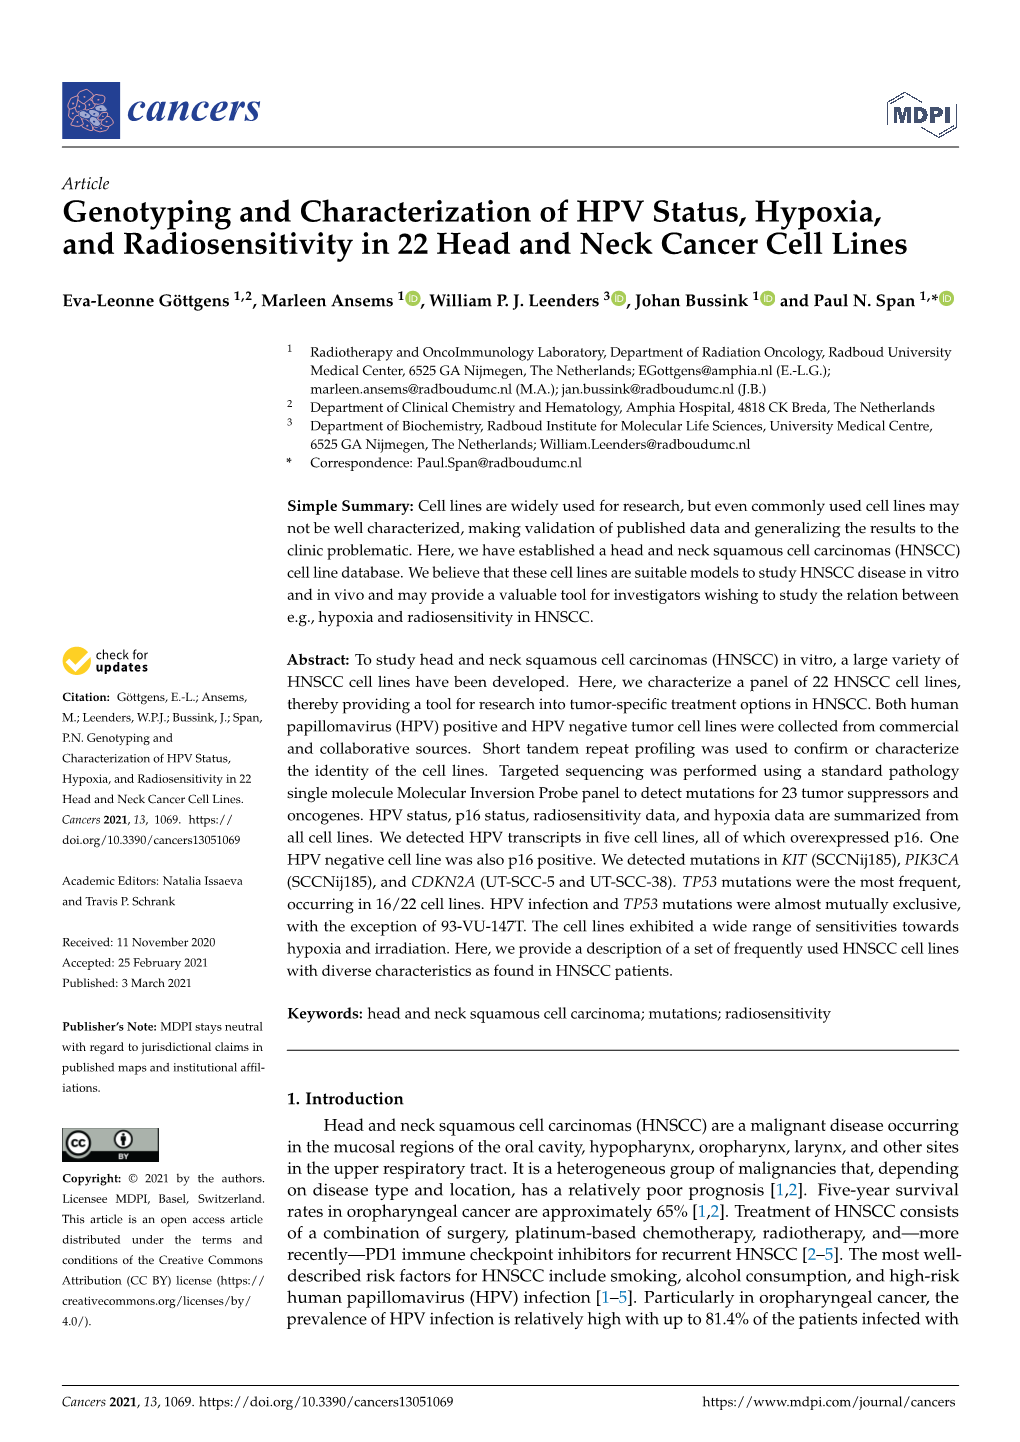 Genotyping and Characterization of HPV Status, Hypoxia, and Radiosensitivity in 22 Head and Neck Cancer Cell Lines